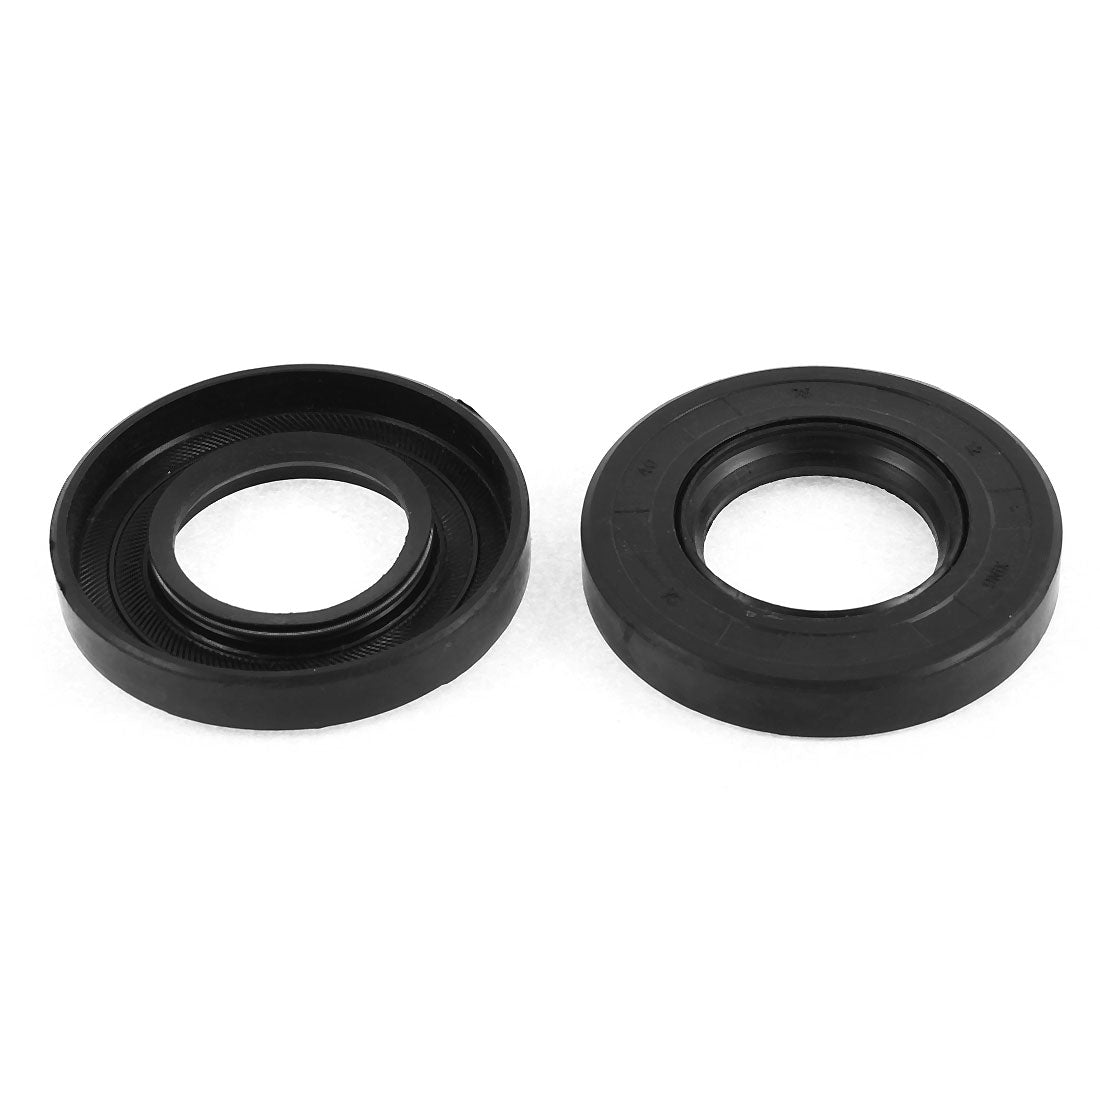 Uxcell Uxcell 2Pcs 40mm x 75mm x 12mm Rubber Oil Seal Sealing Ring Gasket Washer